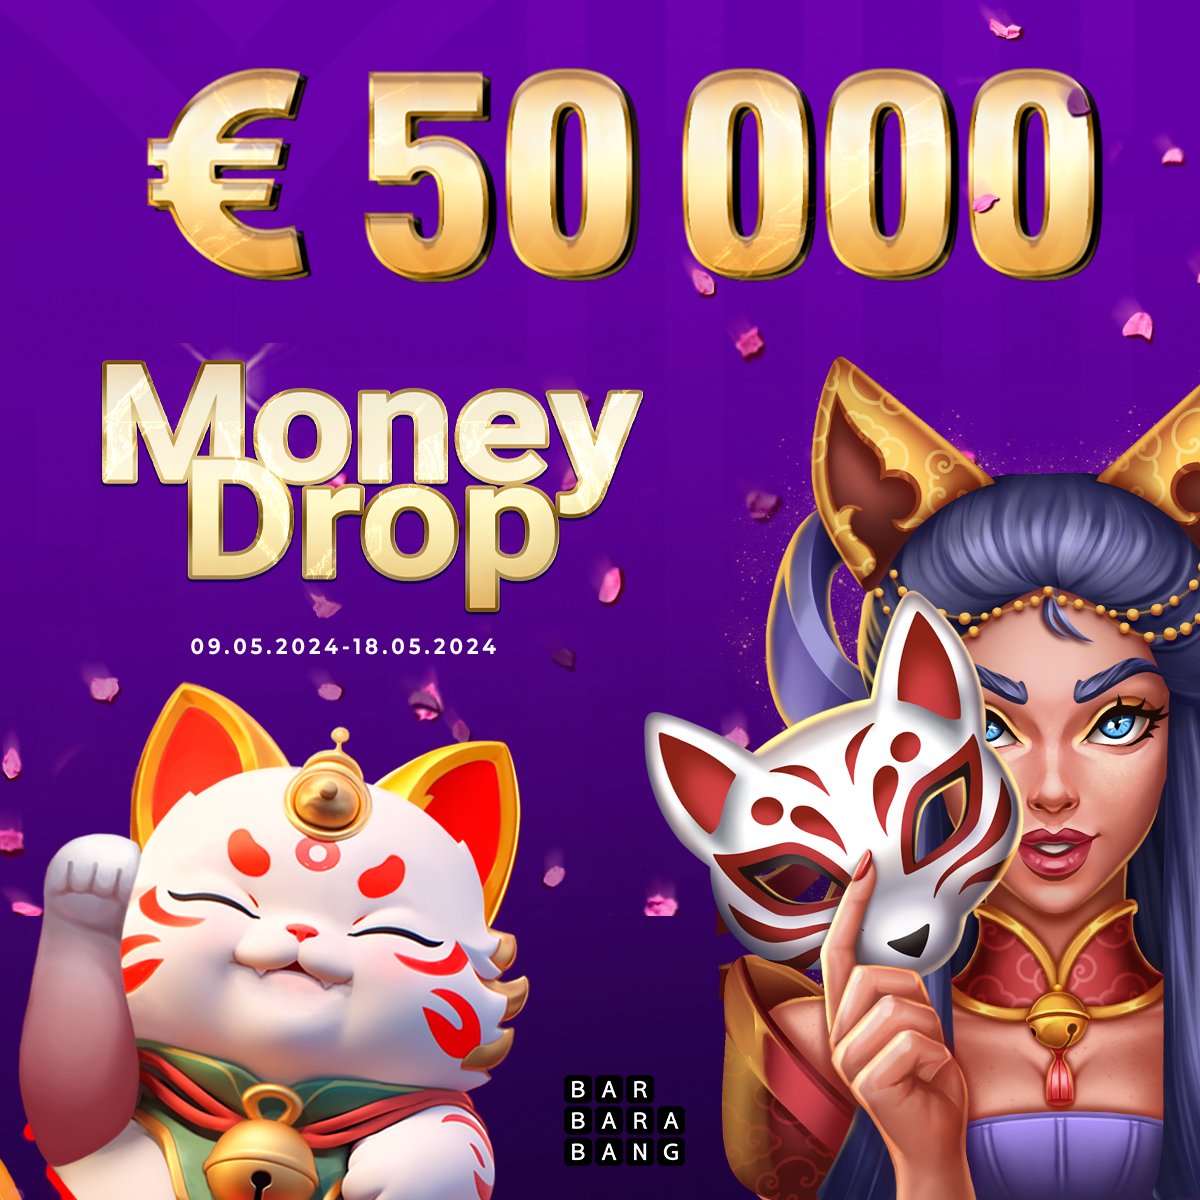 💸 Barbara Bang | Money Drop 🍀 You still have the opportunity to try your luck 📅 Period: May 9, 2024 – May 18, 2024 at 23:45 GMT 💰 Prize pool: 50,000 EUR #barbarabang #casino